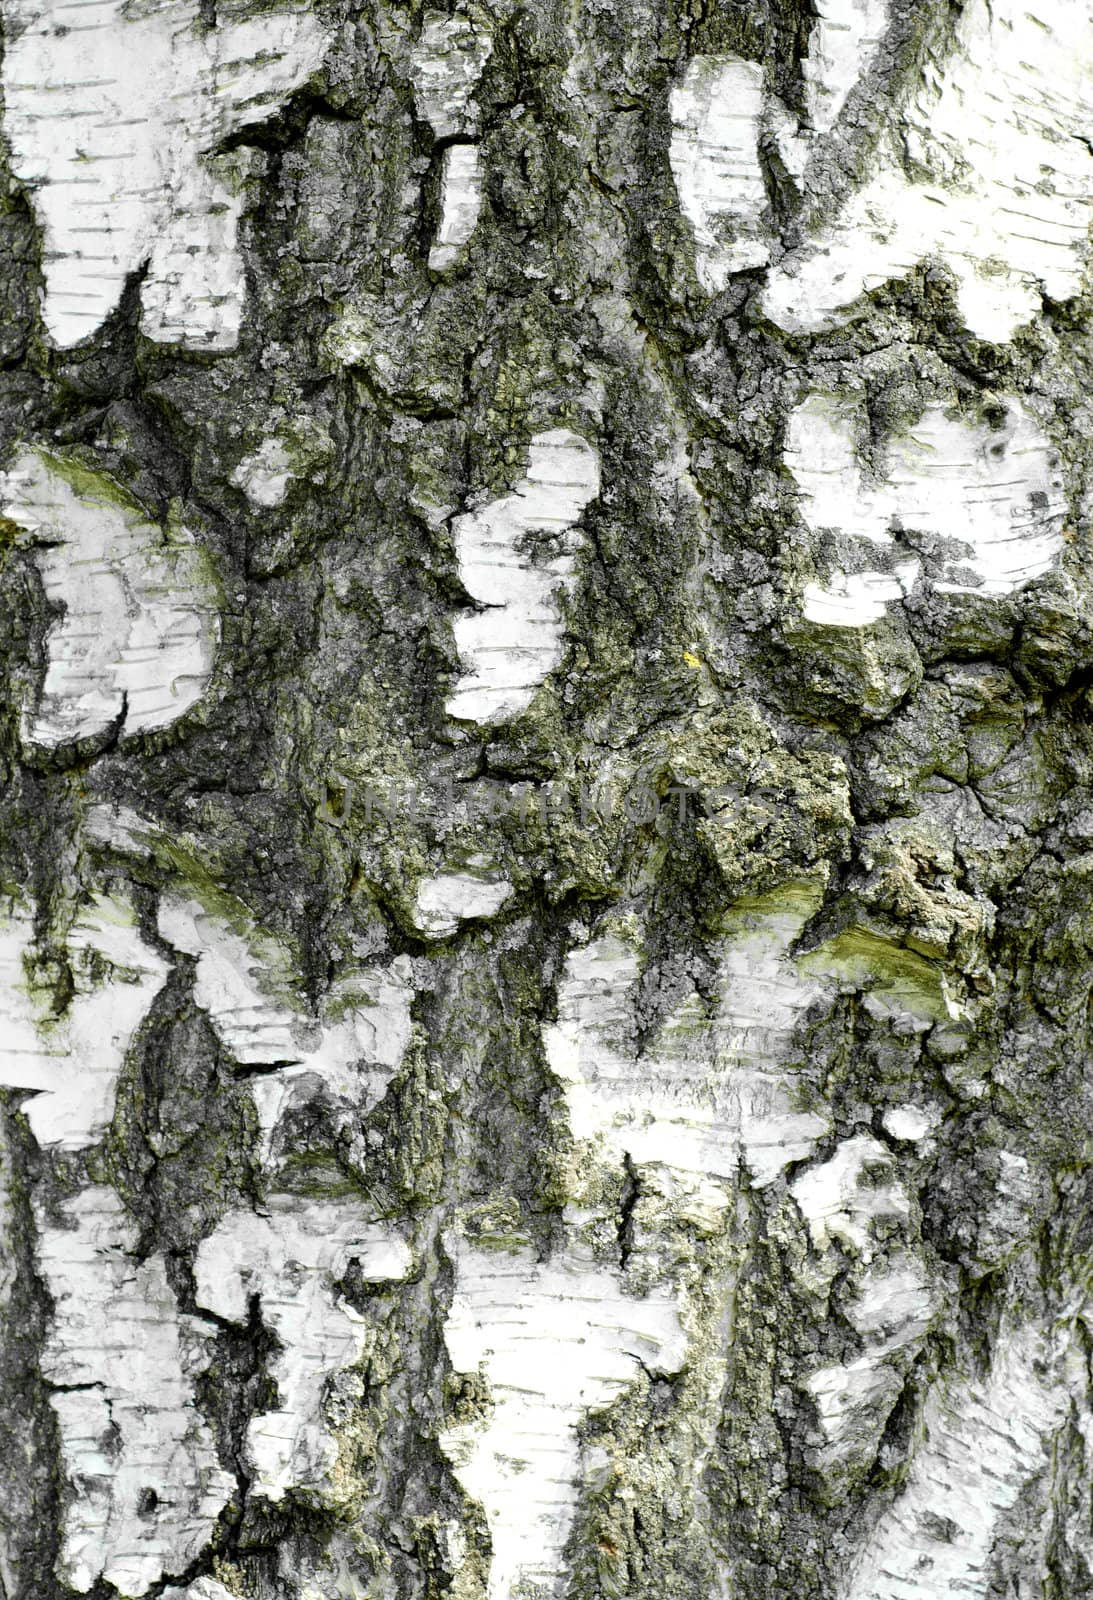 Closeup view of the bark of a white birch tree.